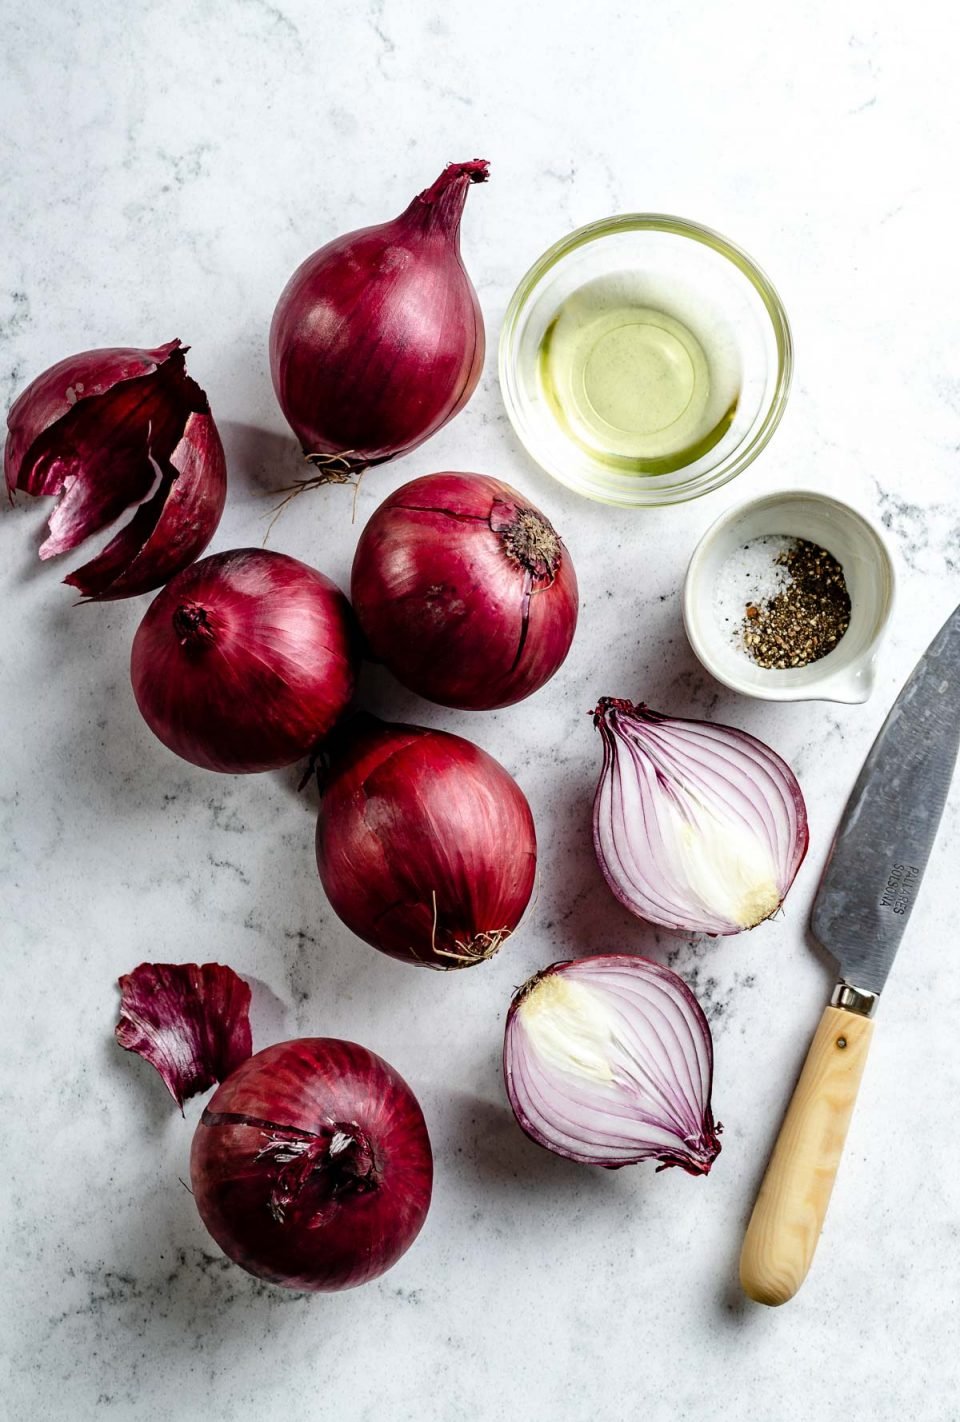 Grilled onion ingredients arranged on a white & grey marble surface - red onion, avocado oil, kosher salt, & ground black pepper. A pairing knife rests on the surface next to the ingredients.